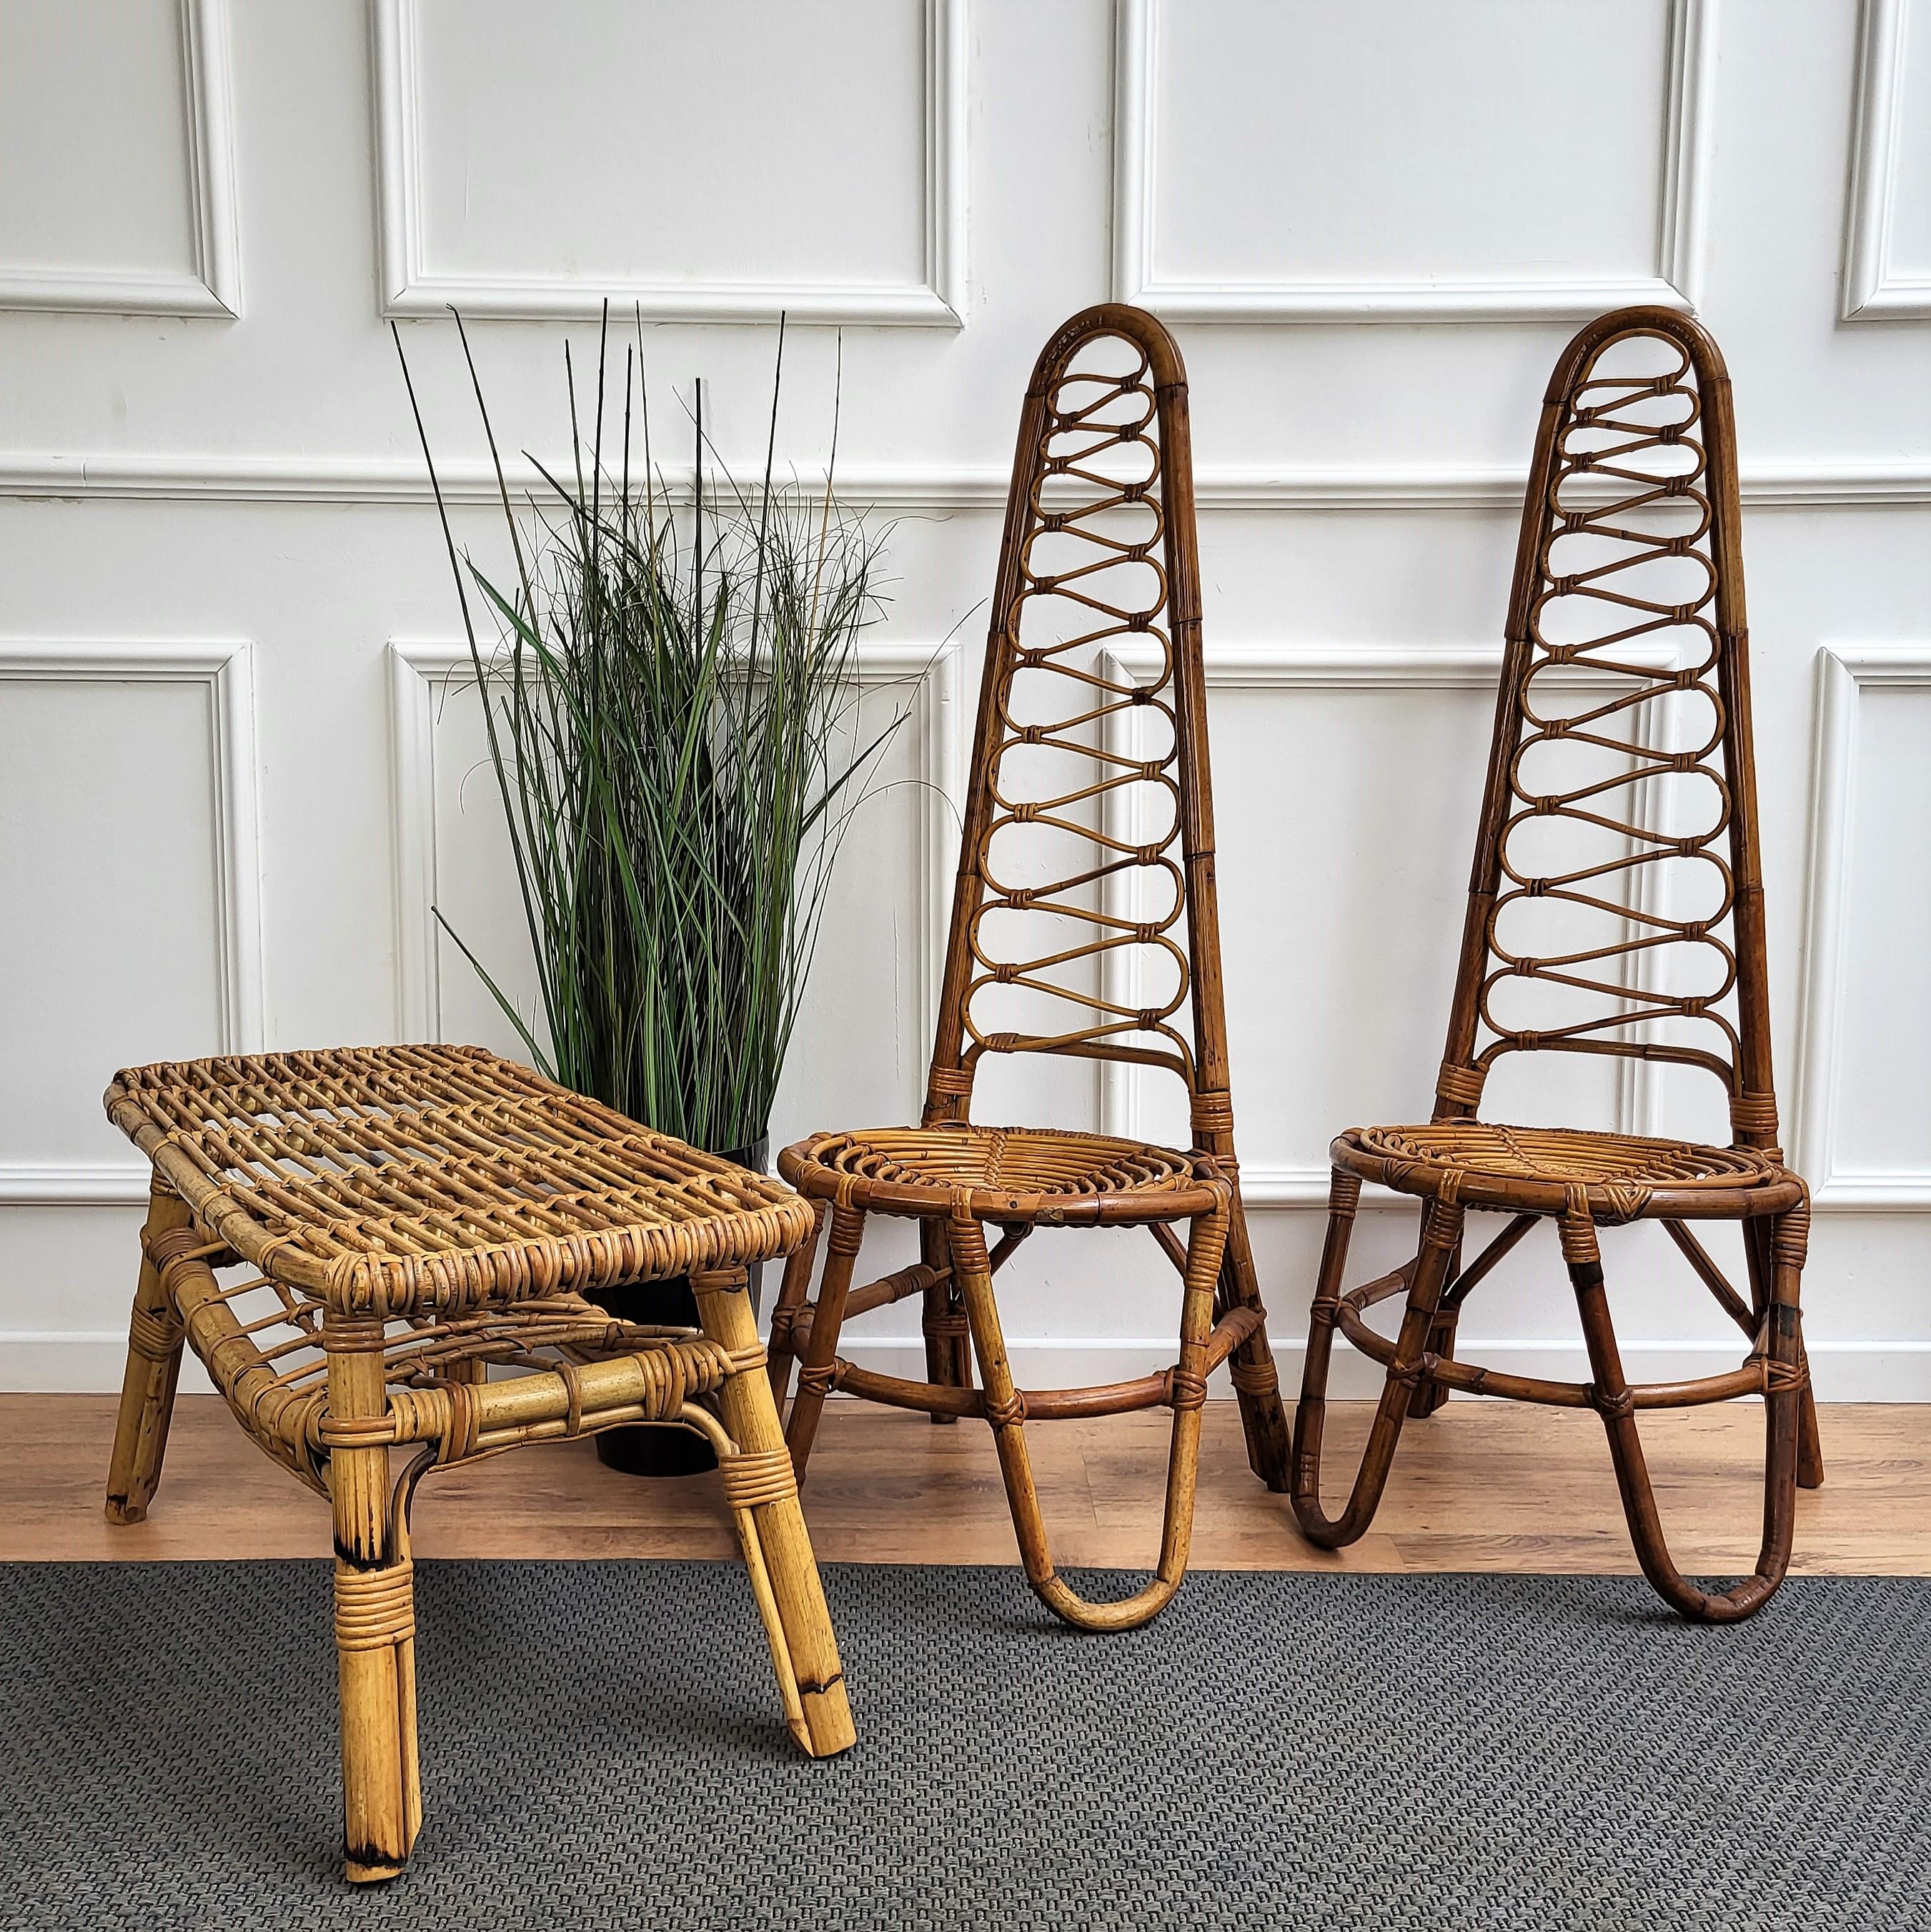 Beautiful 1960s pair of bamboo chairs in the design of Dirk Van Sliedrecht. These charming Mid-Century Modern pieces with the unique design and tall high back where the organic beauty of the woven materials is timeless and classic are incredibly